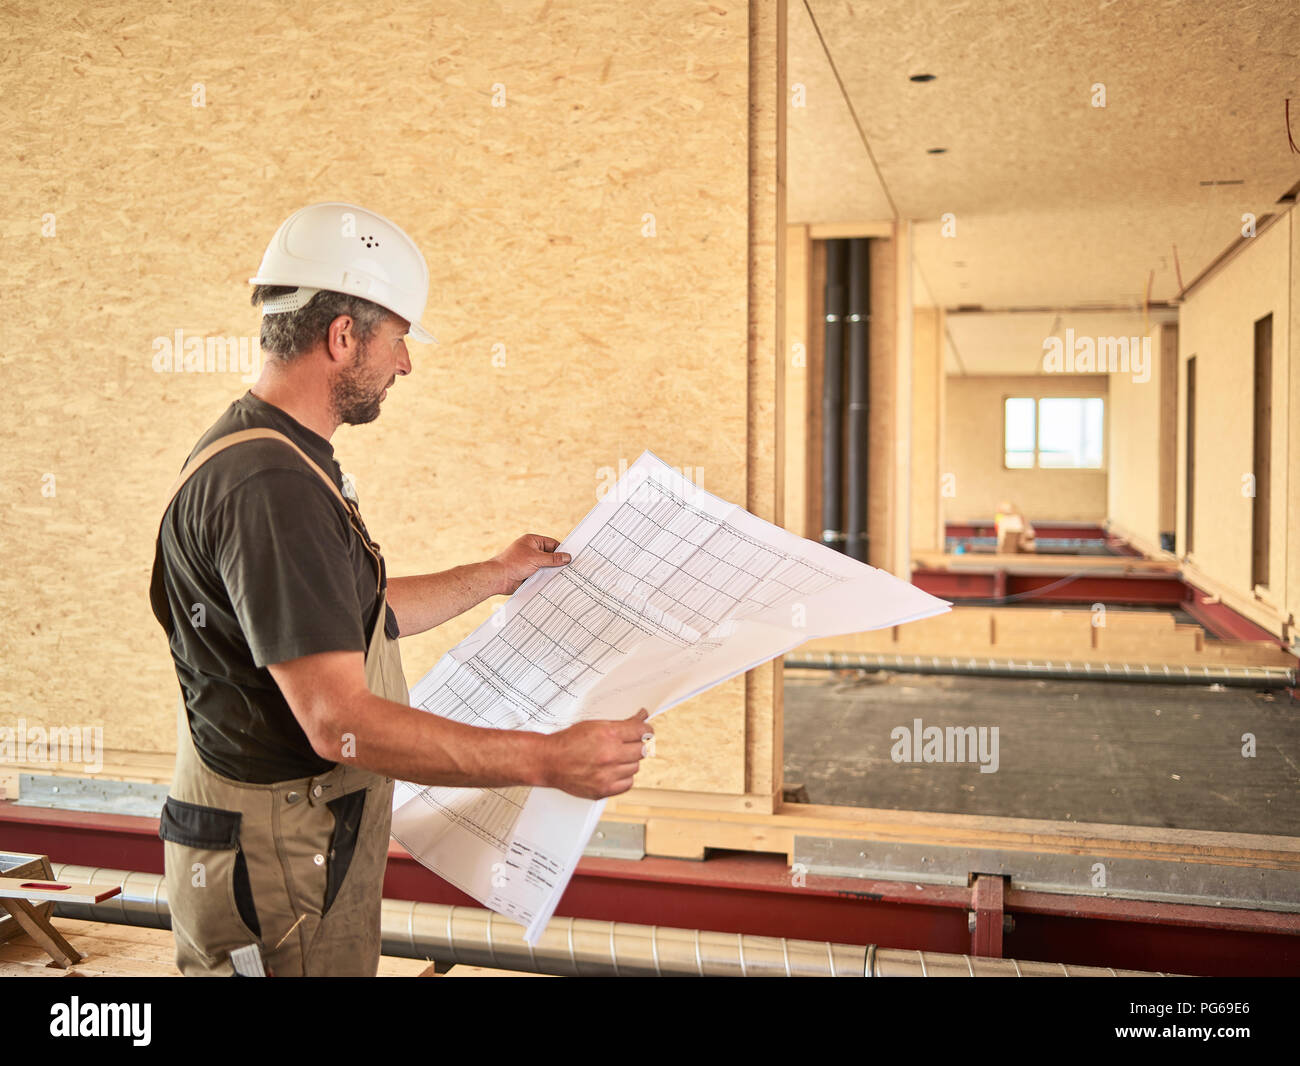 Worker with helmet holding construction plan Stock Photo